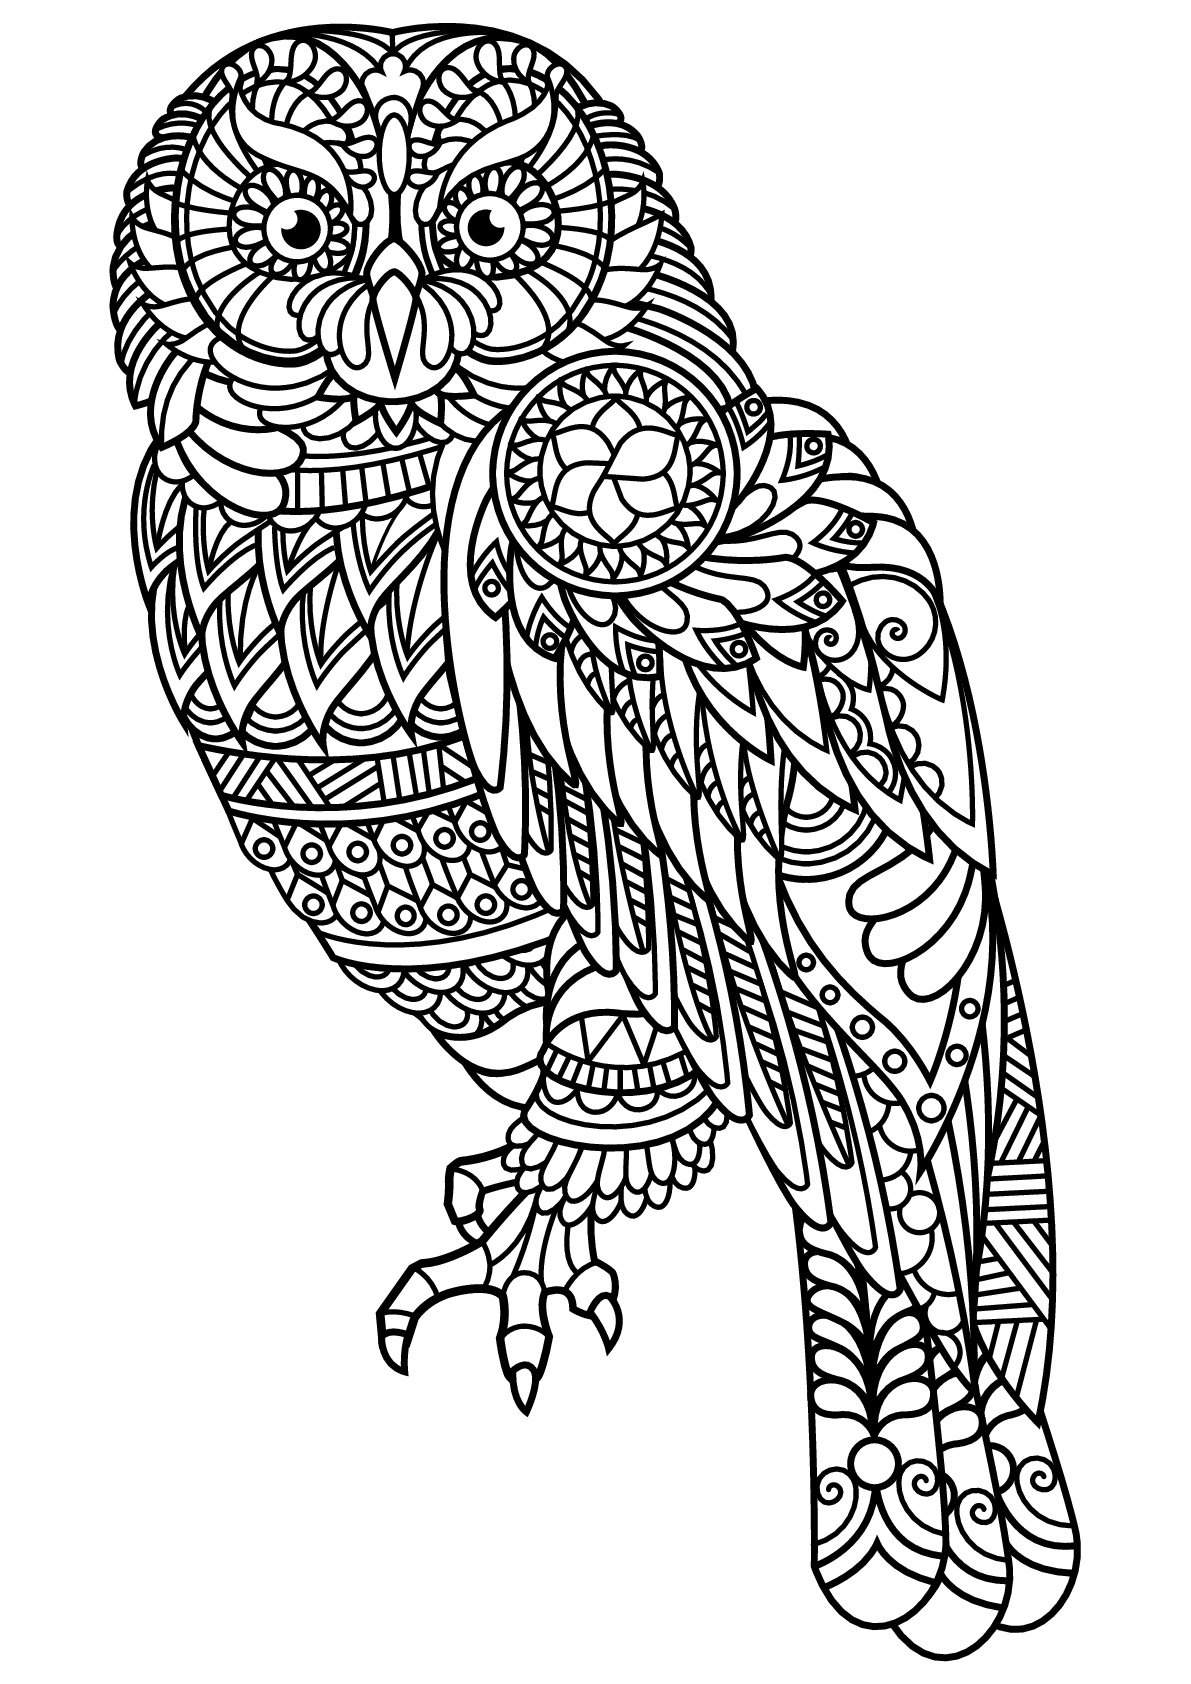 Owl with beautiful patterns - Owls Adult Coloring Pages